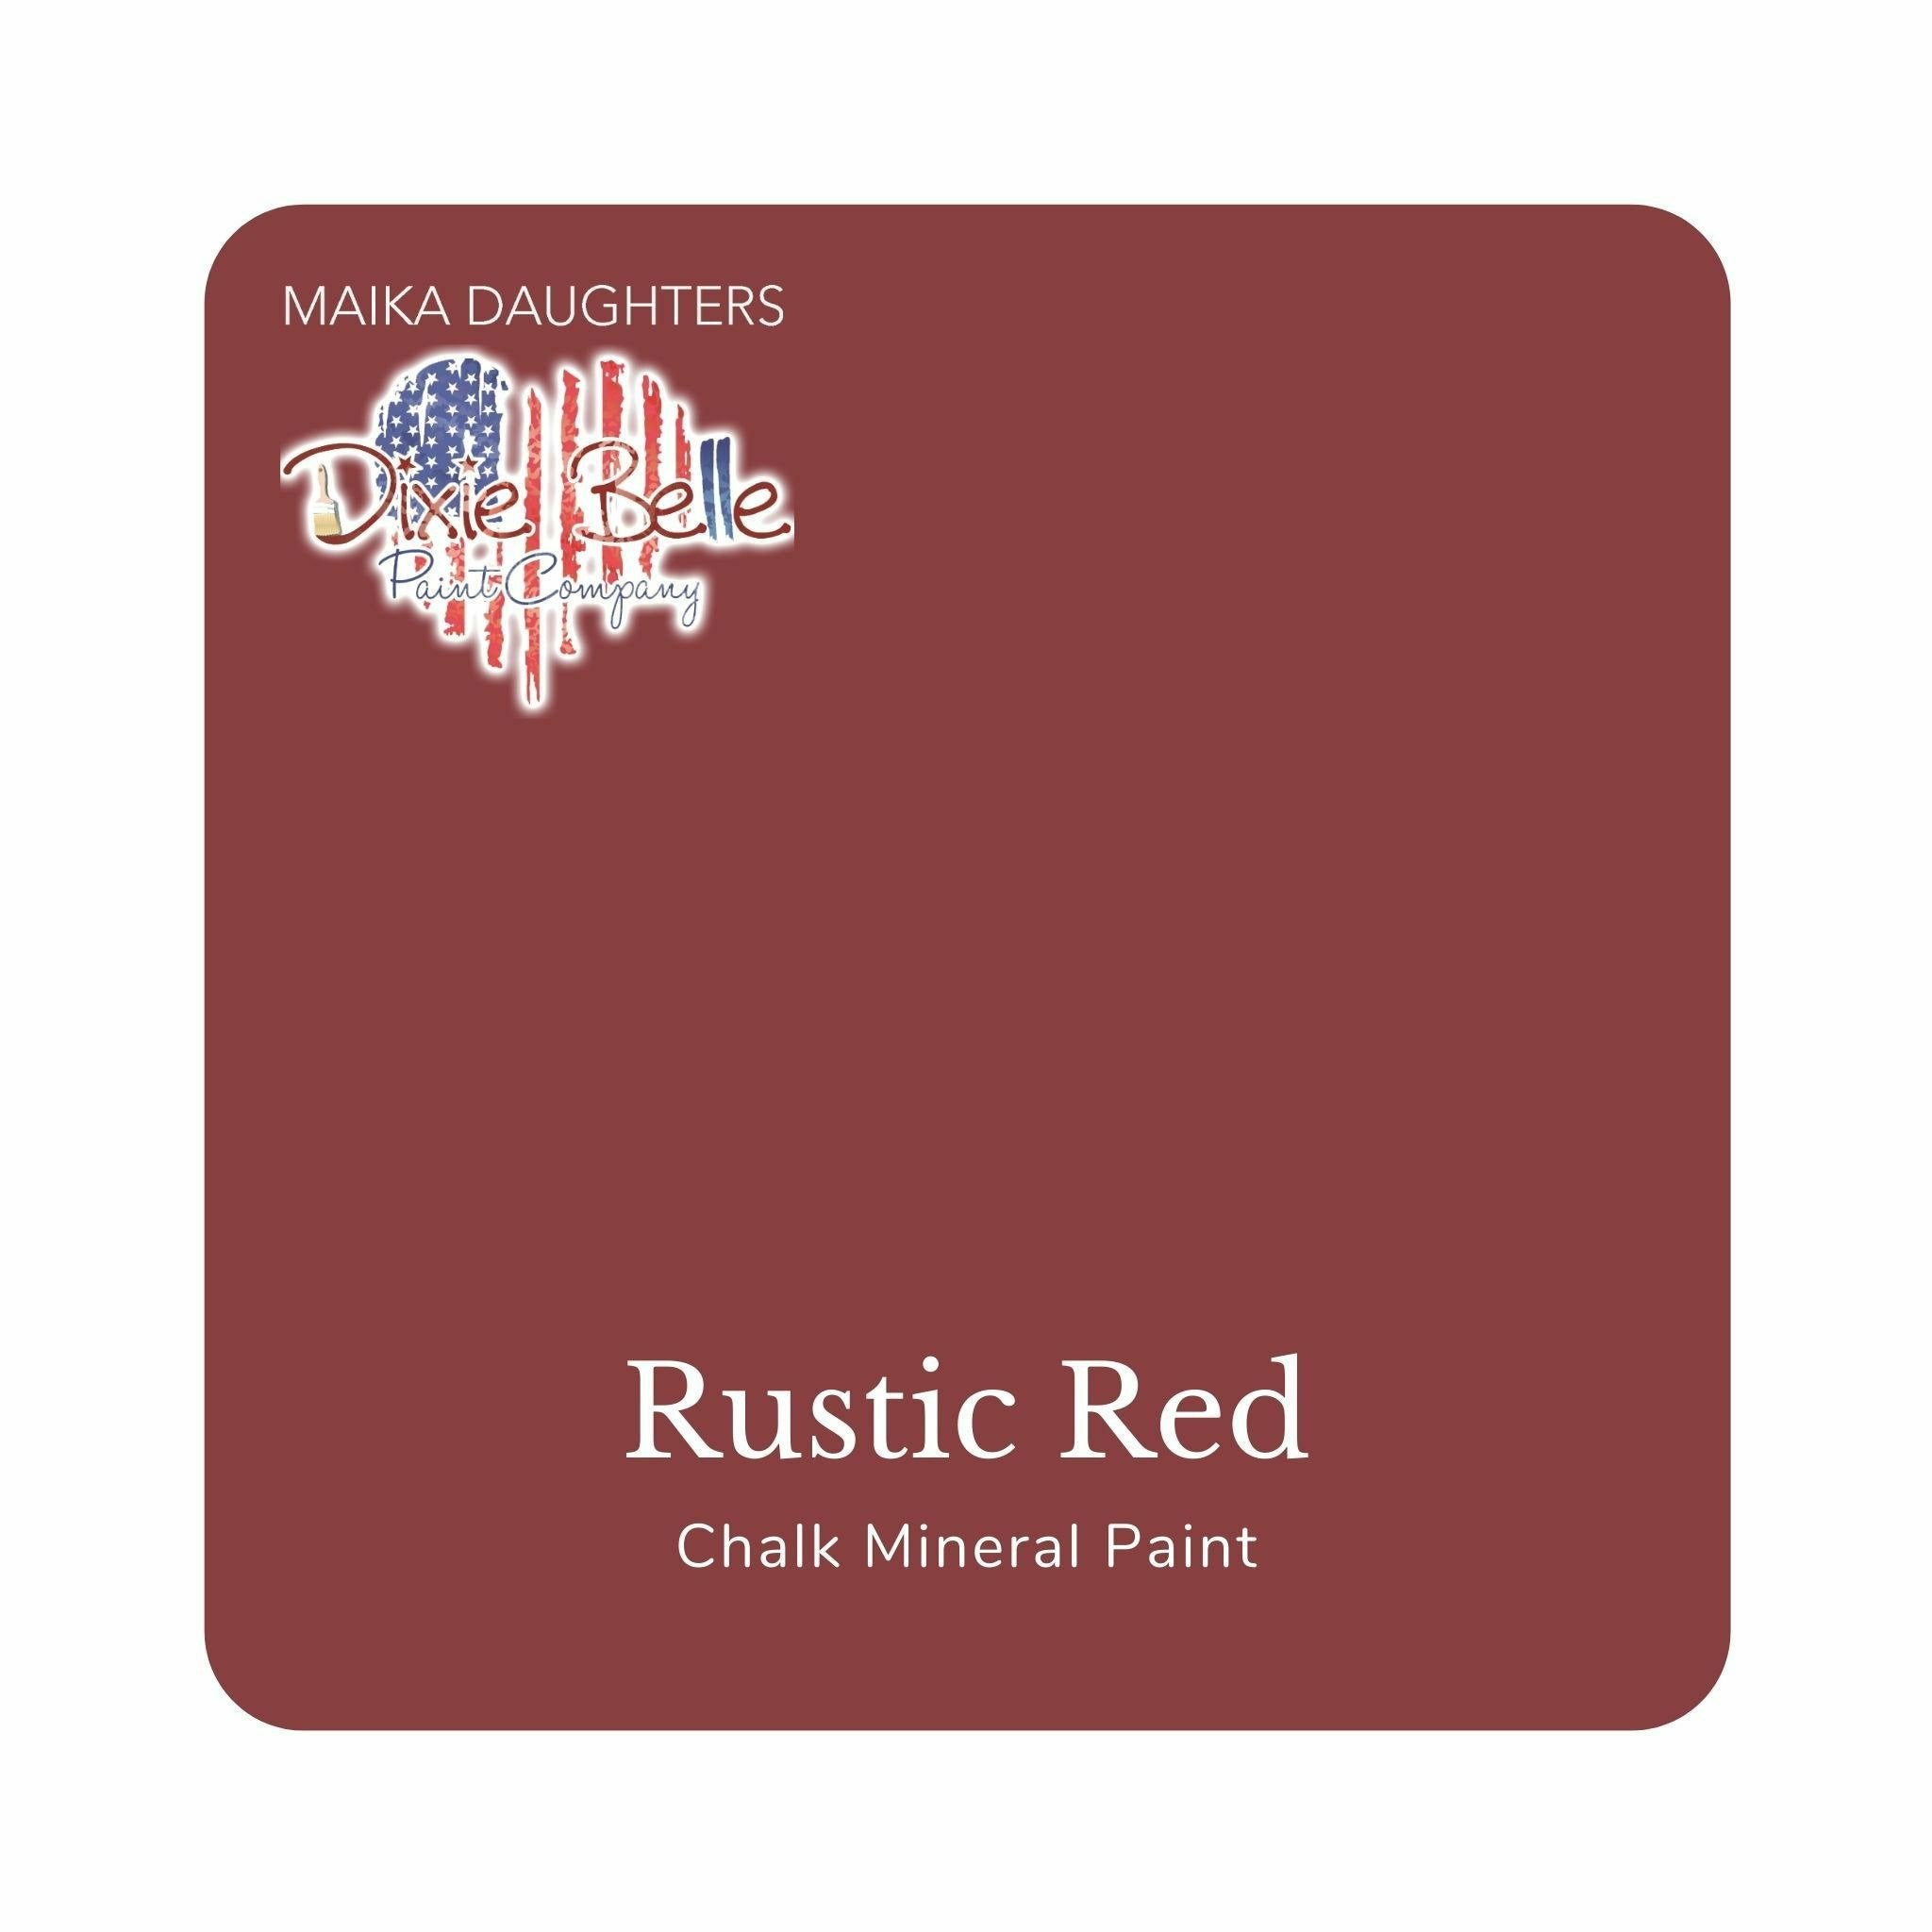 A square swatch card of Dixie Belle Paint Company’s Rustic Red Chalk Mineral Paint is against a white background. This color is a warm birck red.